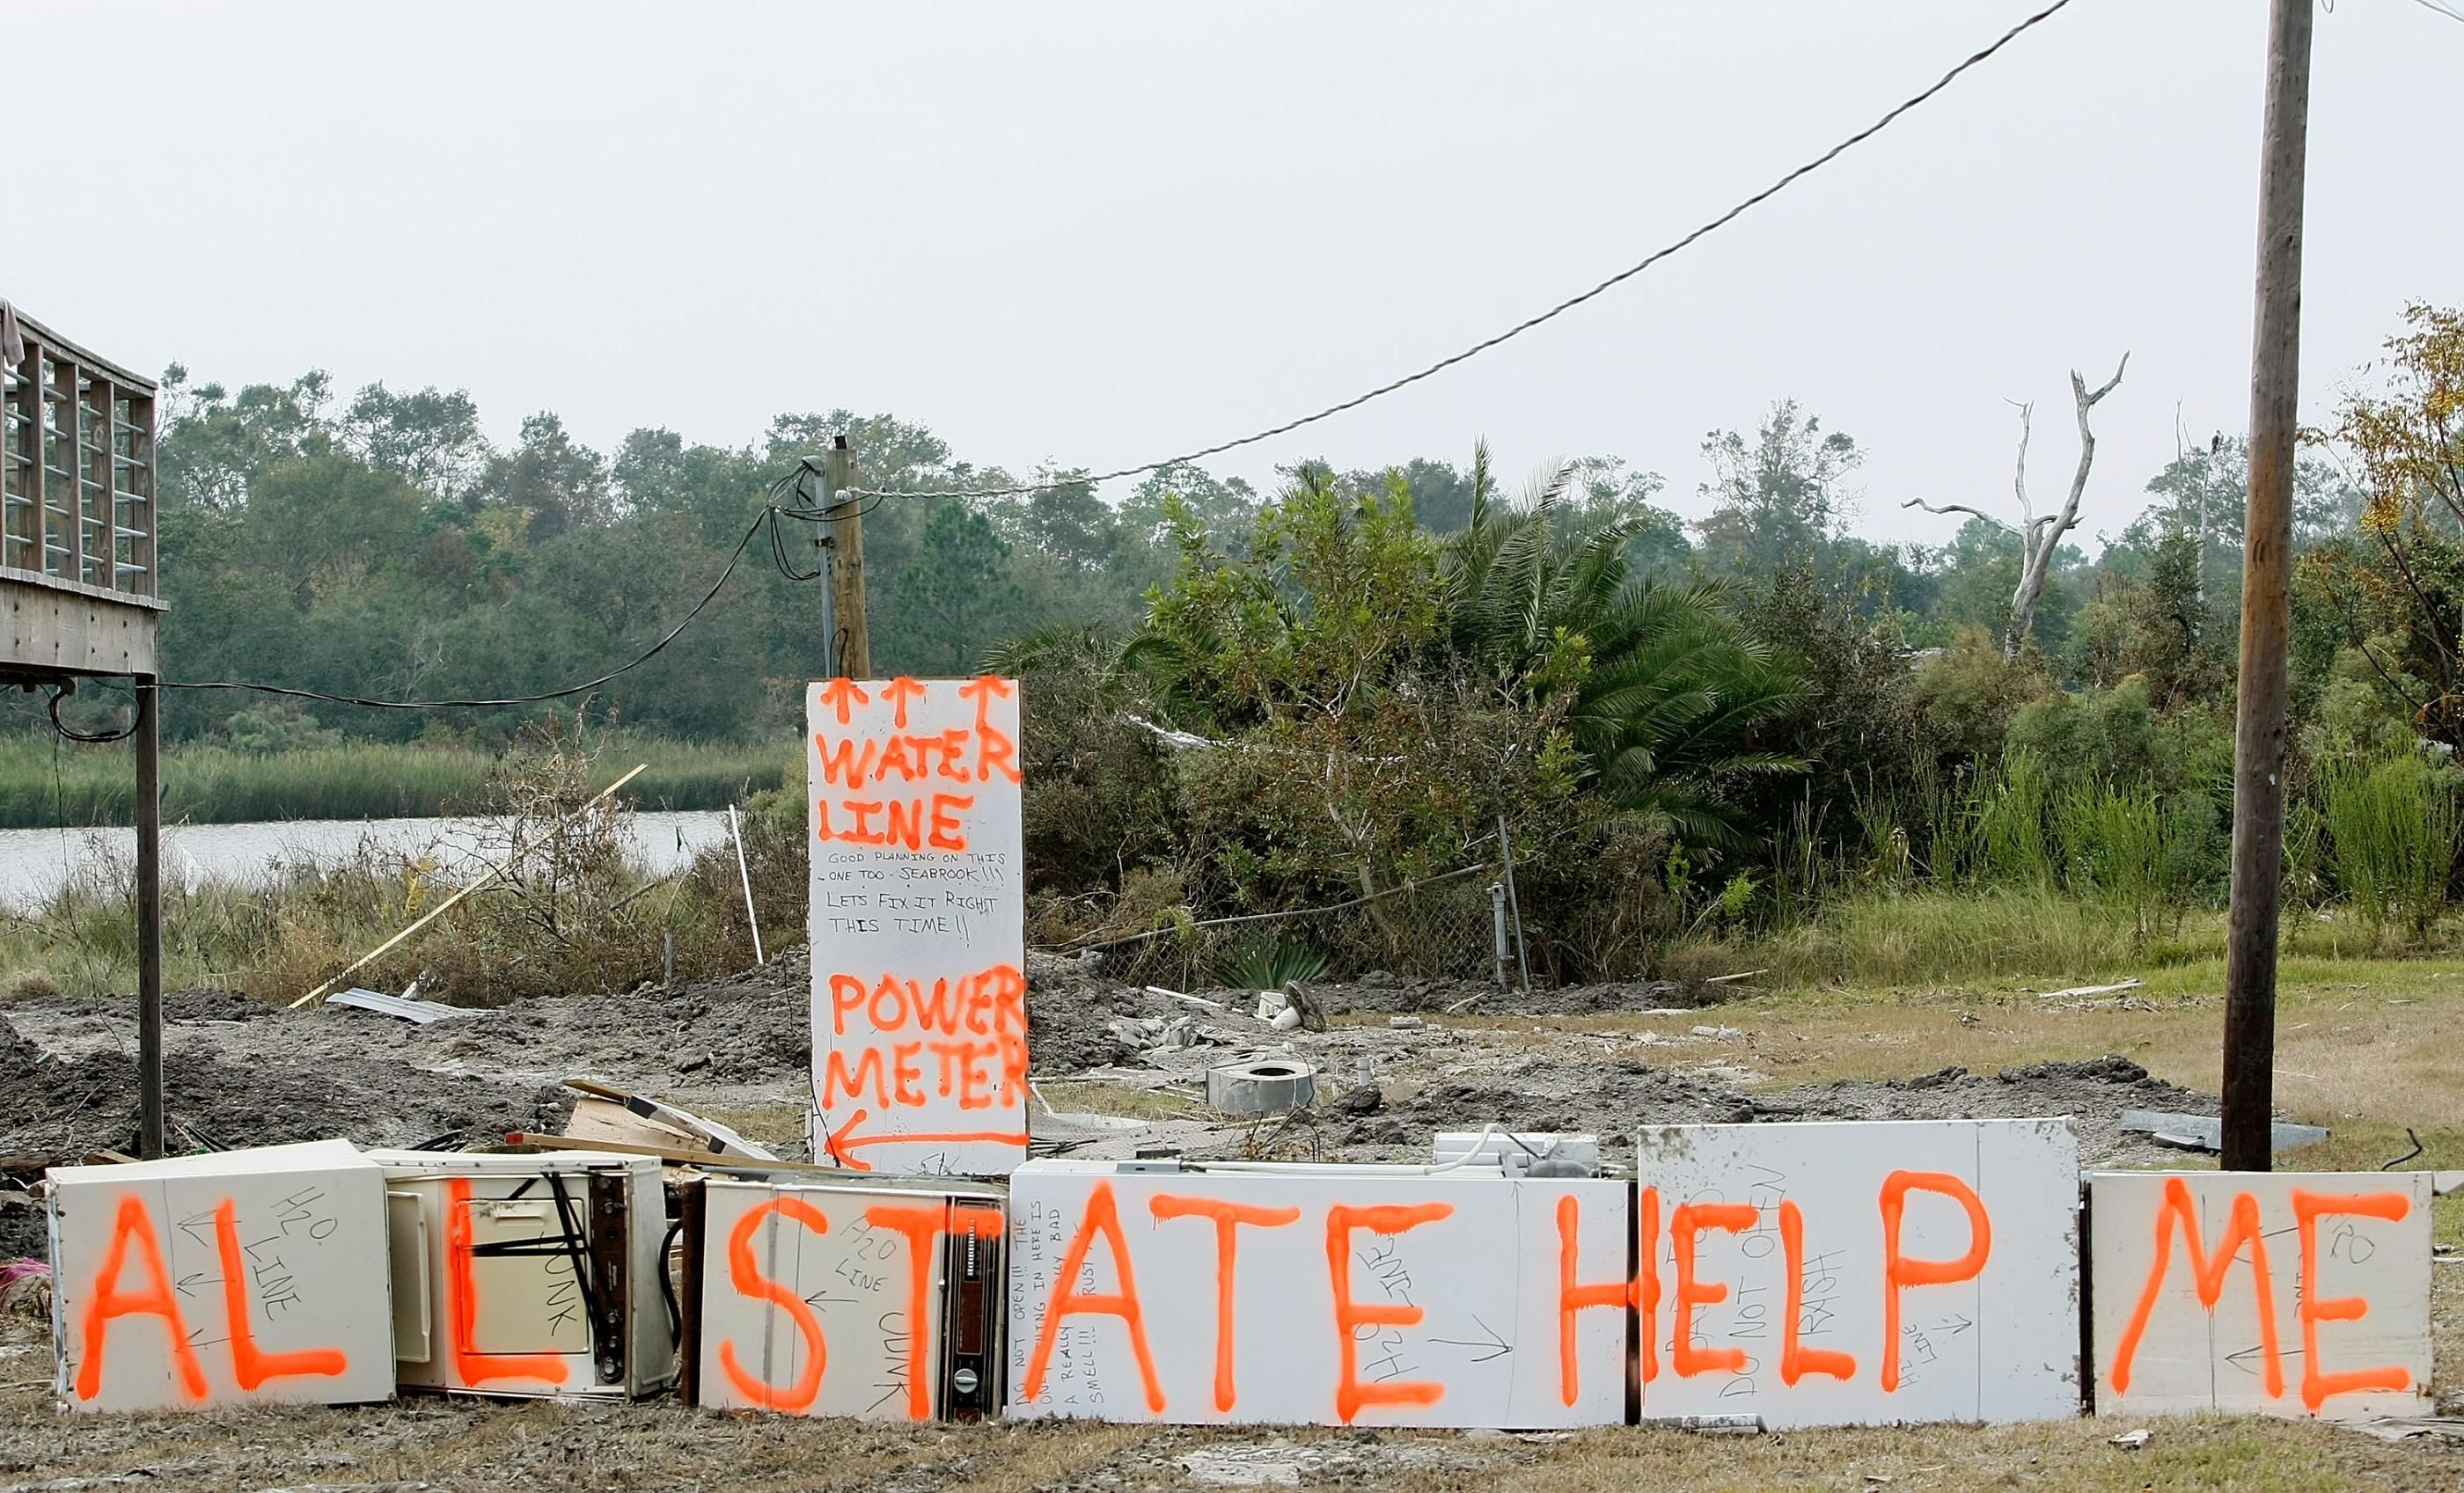 A sign painted on debris from Hurricane Ike reads "Allstate Help Me" on September 19, 2008 in Seabrook, Texas. (Photo: Mark Wilson via Getty Images)